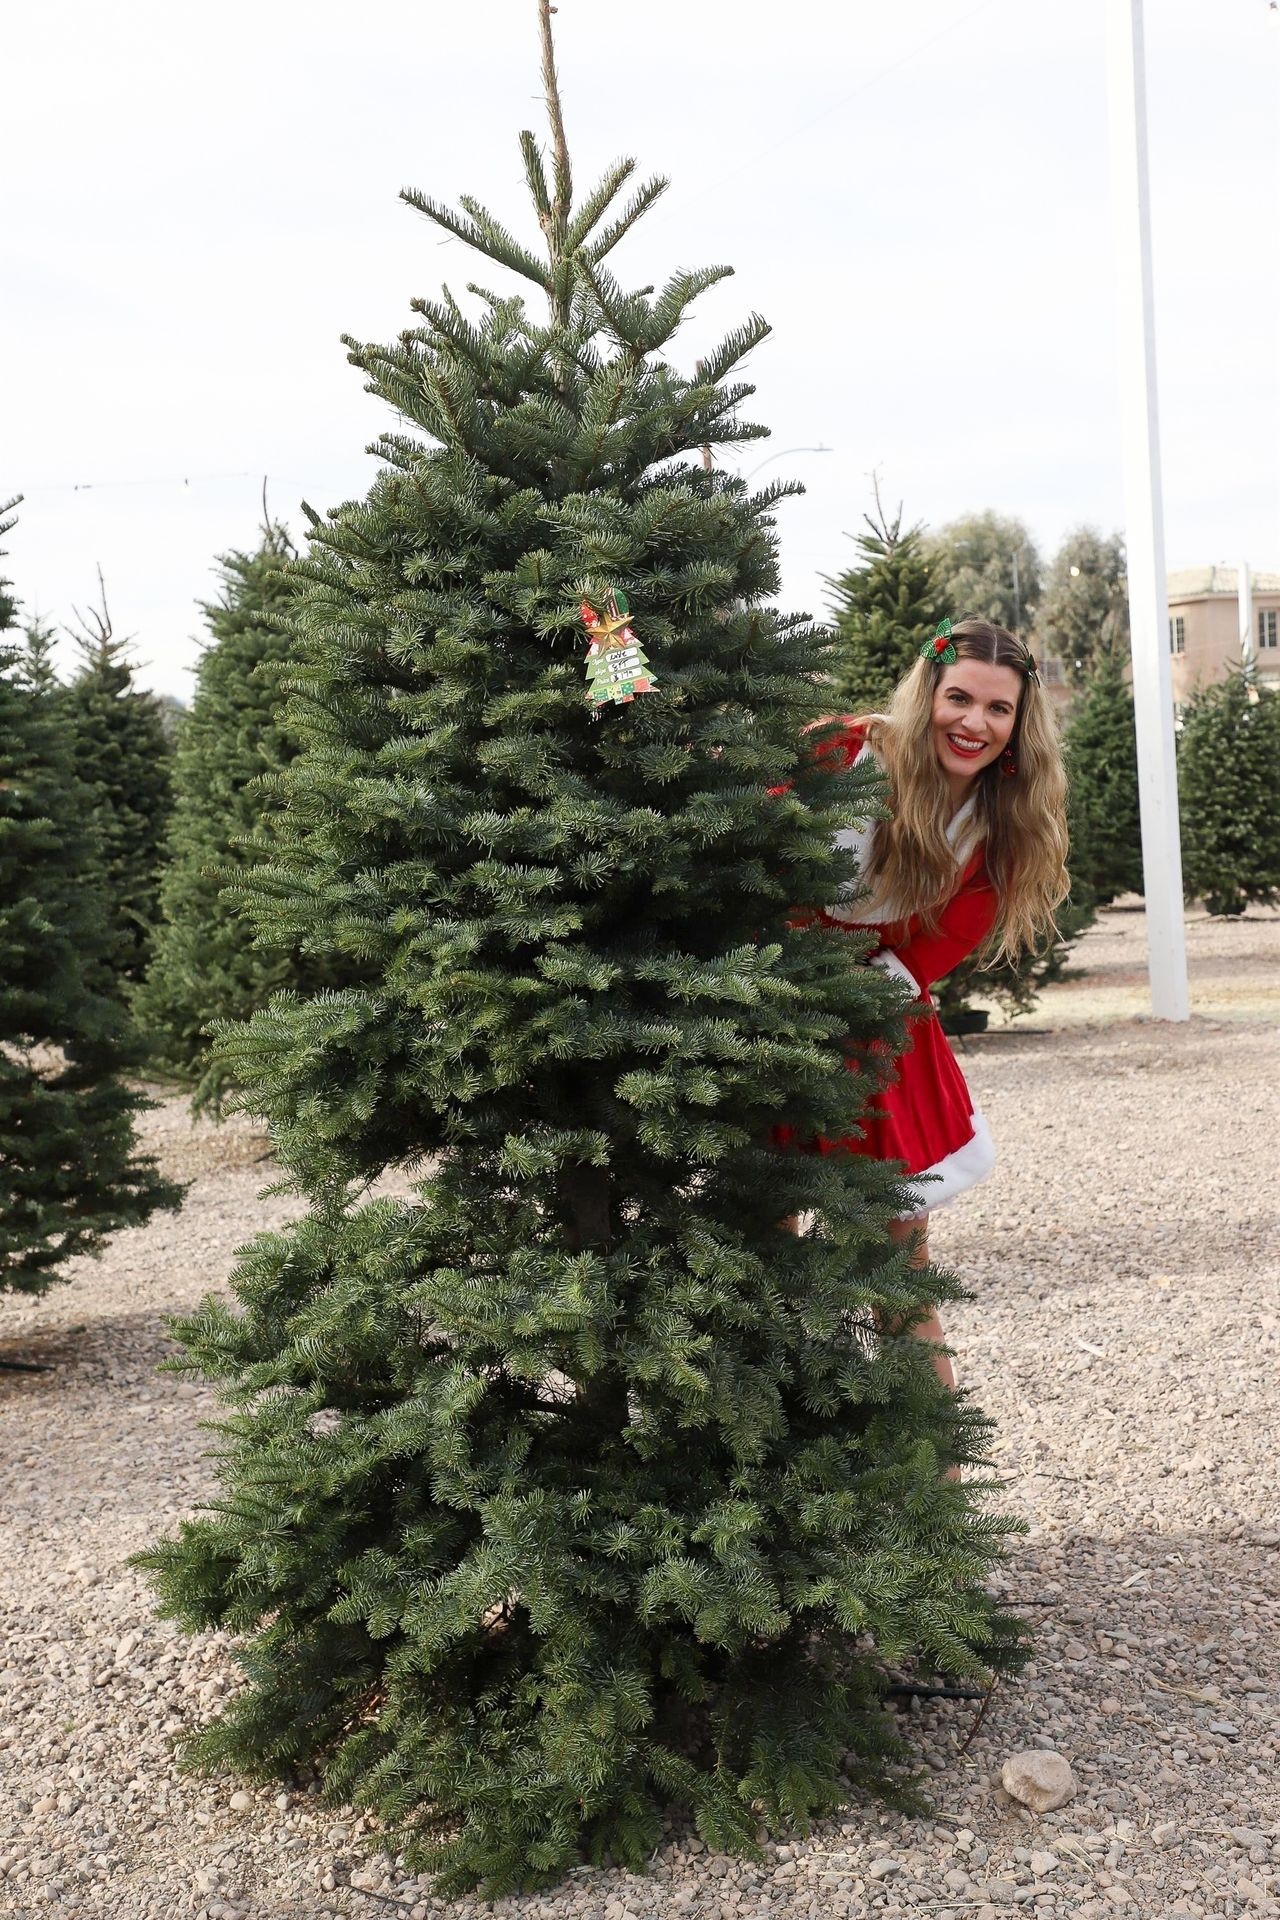 Rachel McCord Gets Into the Holiday Spirit While Out Shopping for a Christmas Tree (11 Photos)